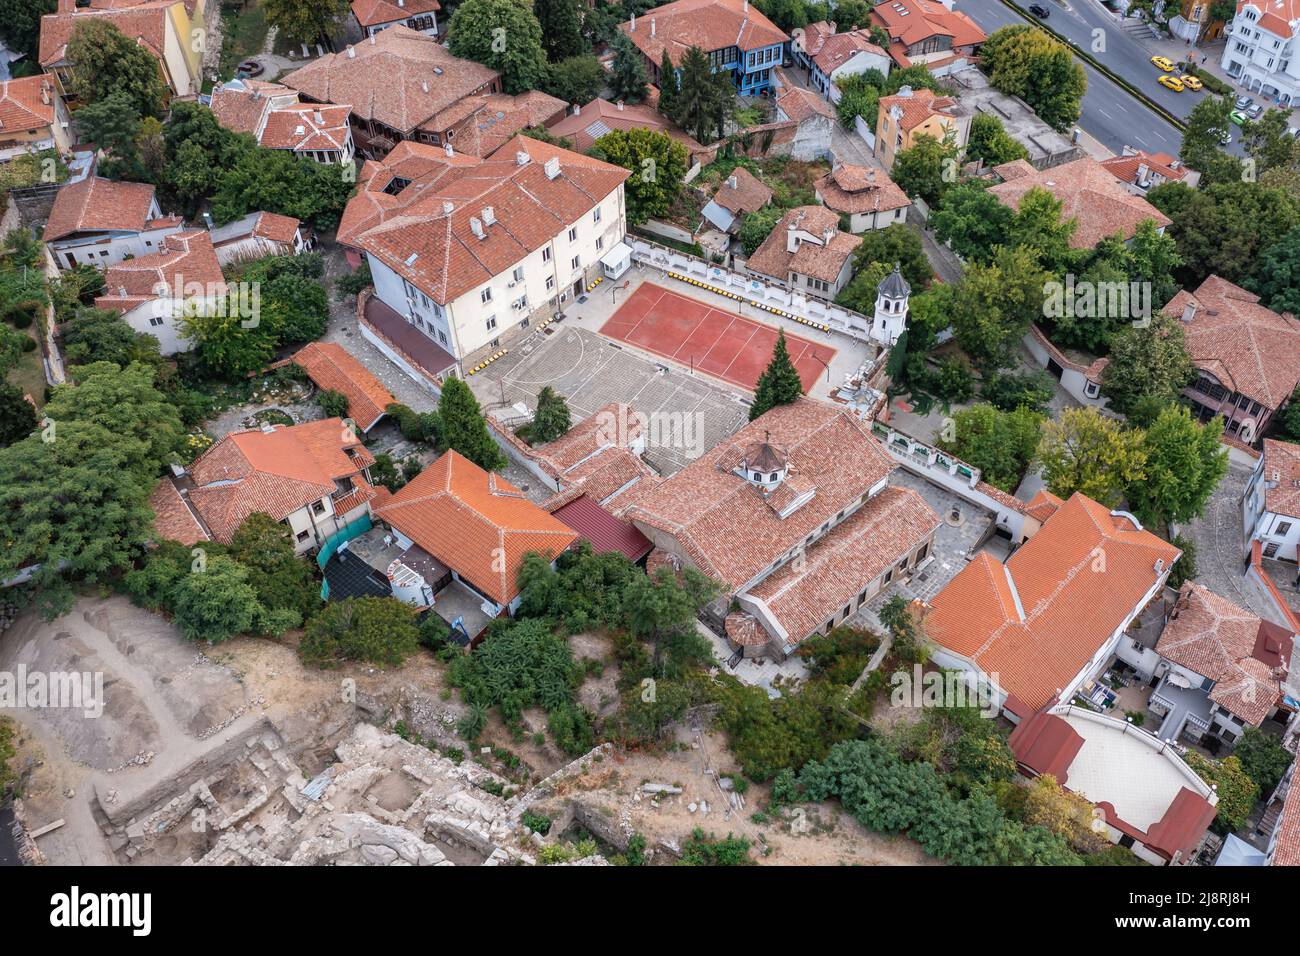 Old Town of Plovdiv city, capital of Plovdiv Province in south-central Bulgaria, view with school and Armenian Apostolic Orthodox Church Surp Kevork Stock Photo